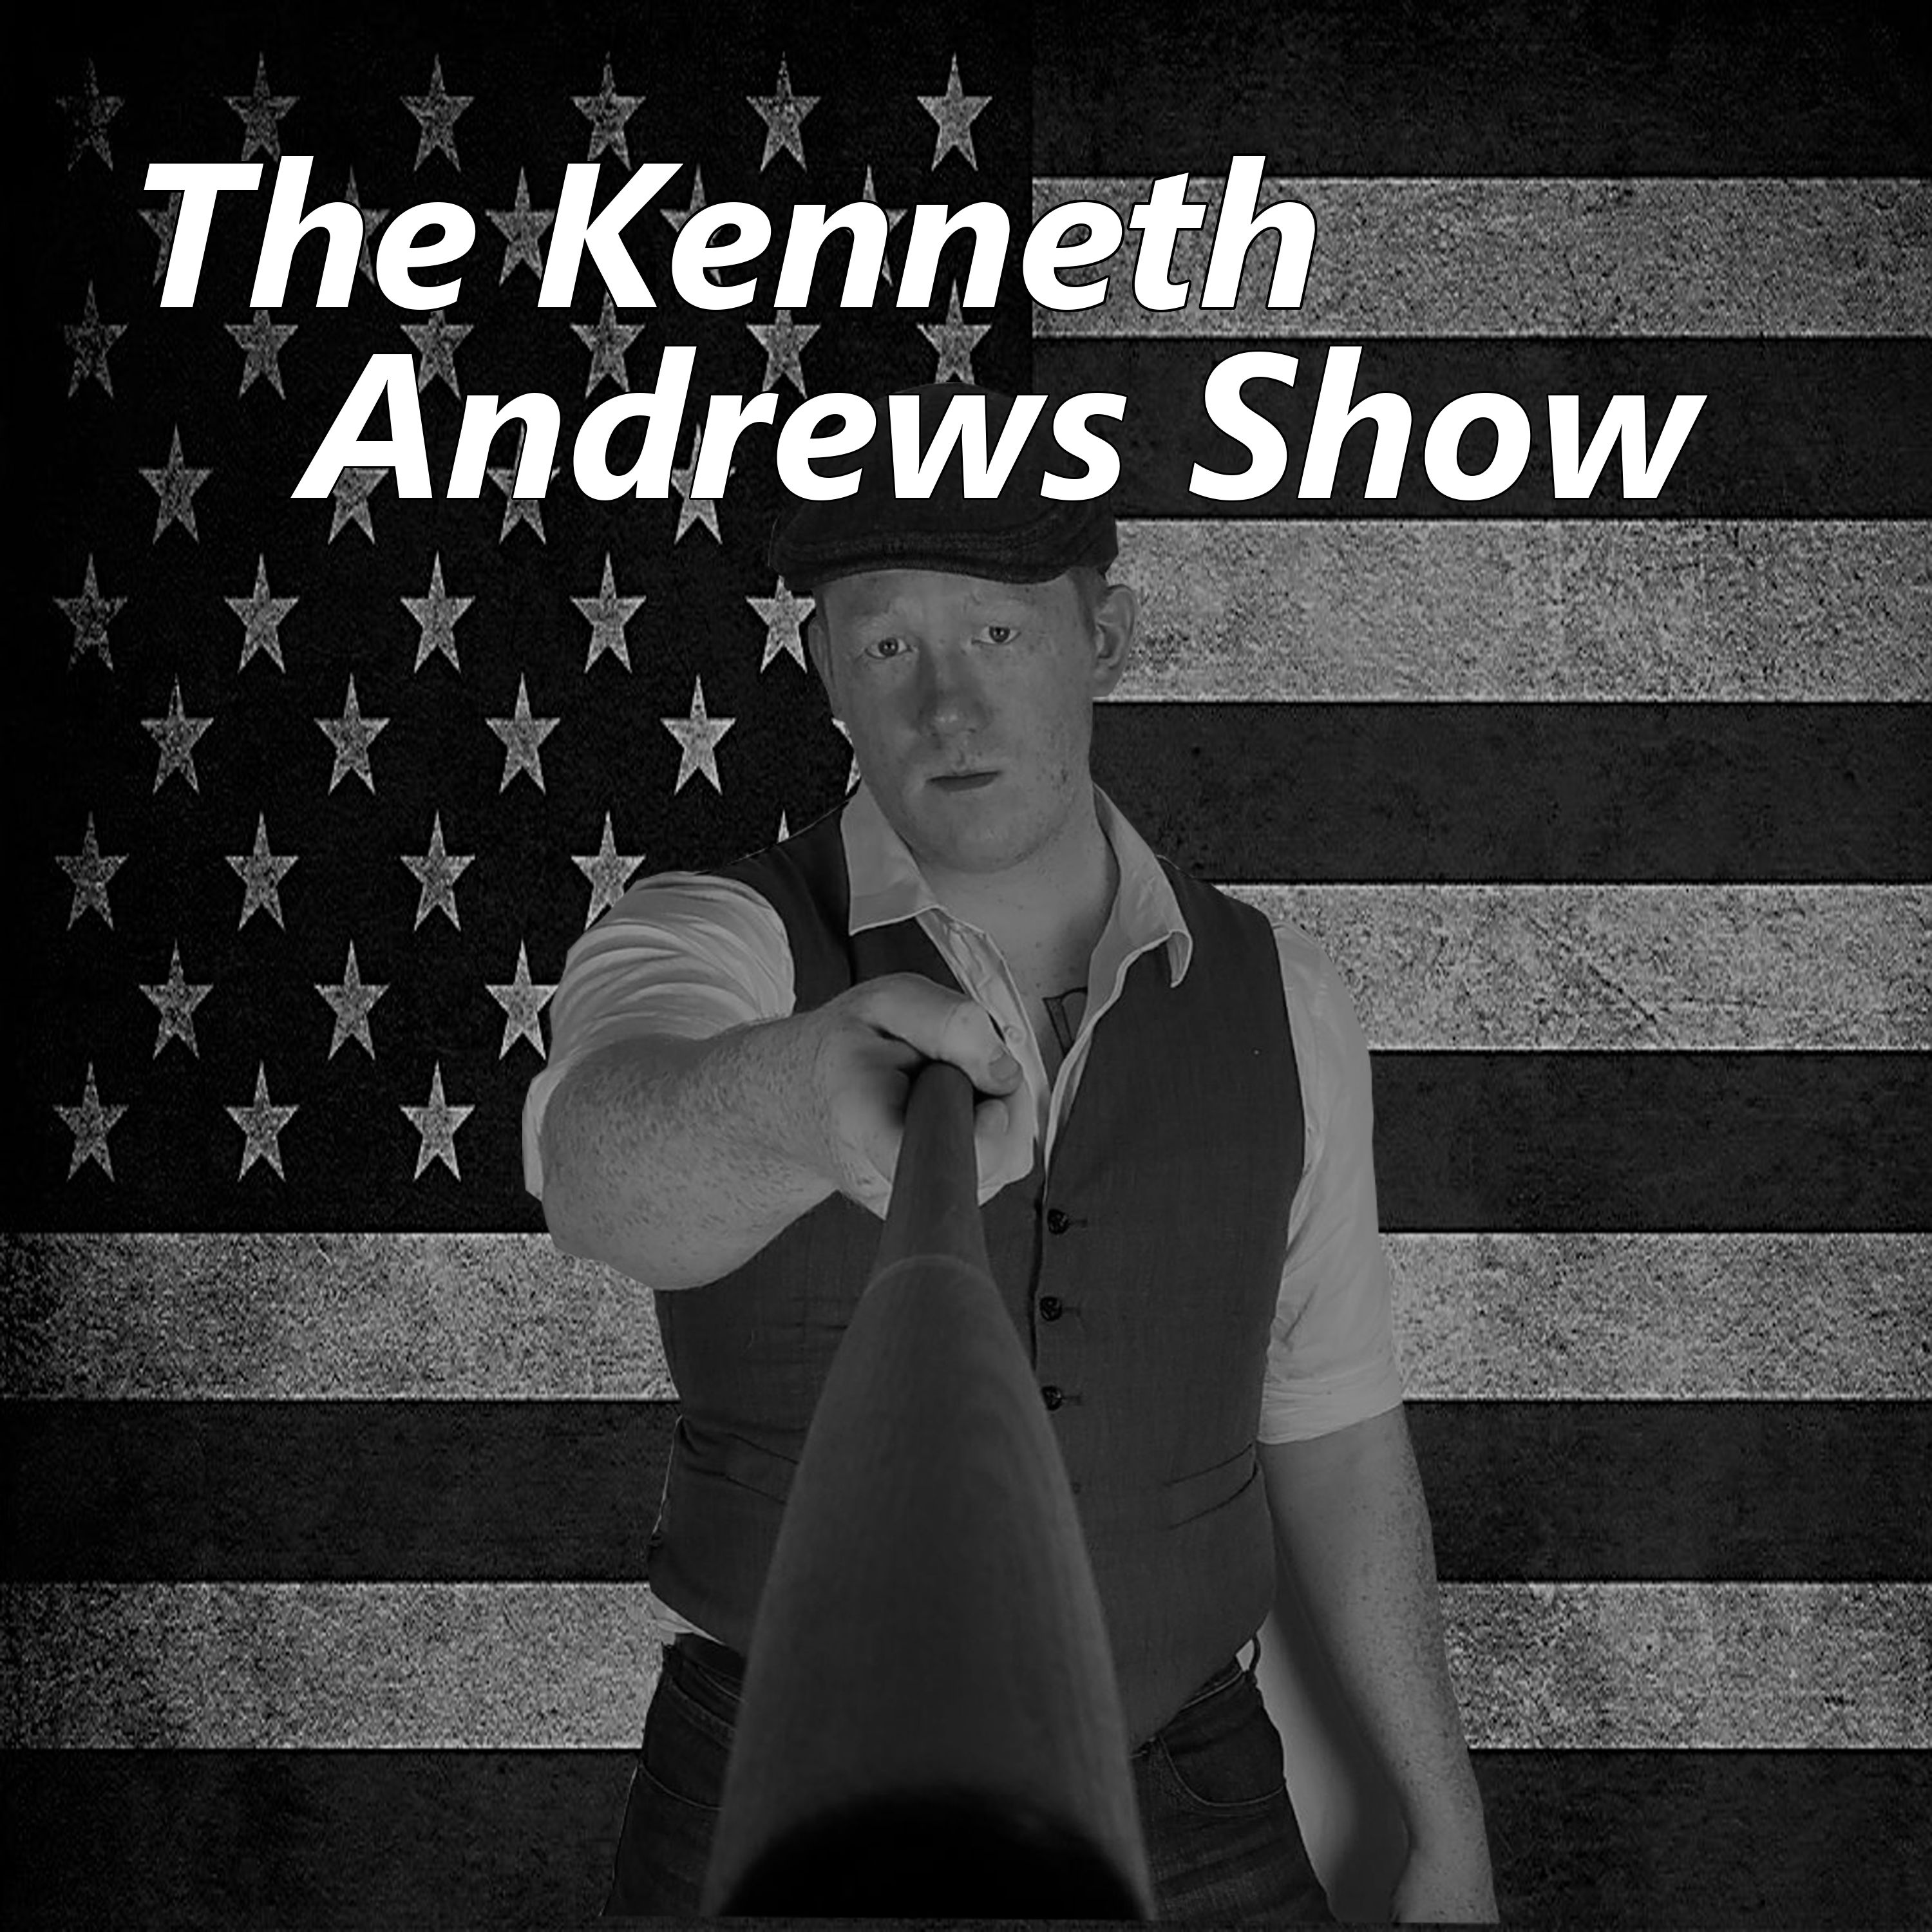 The Kenneth Andrews Show